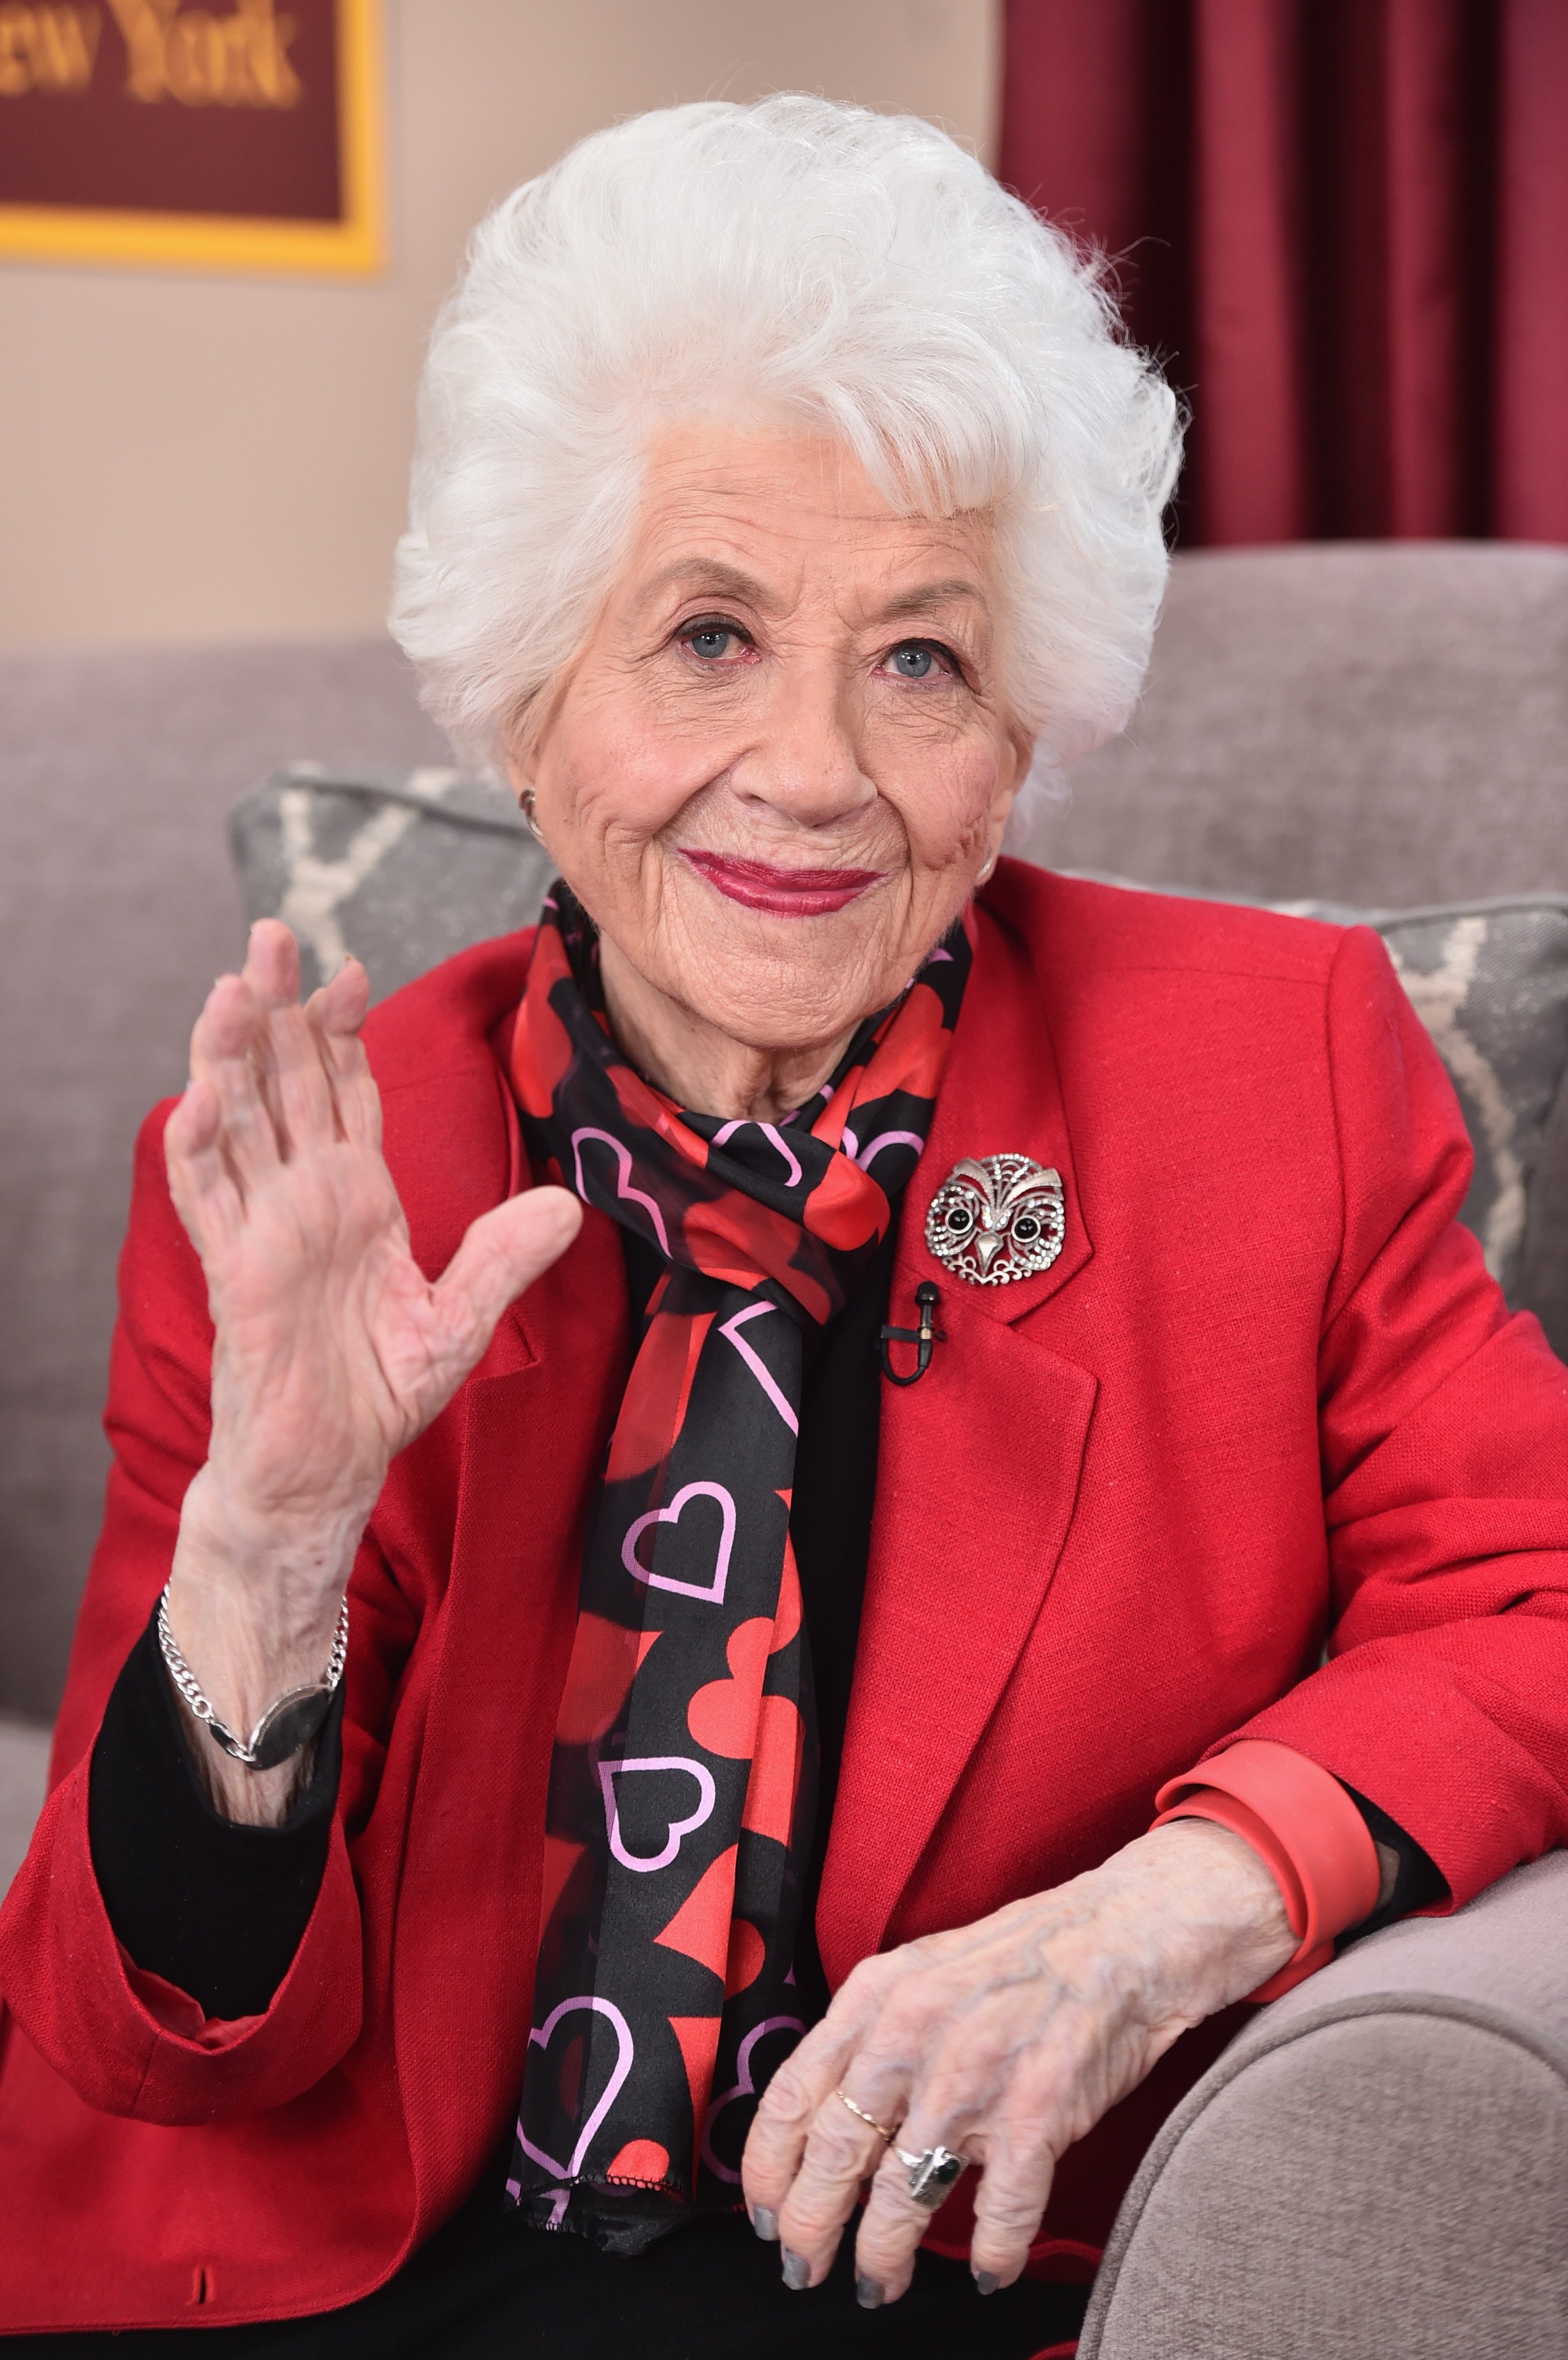 Actress Charlotte Rae attends Hallmark's Home and Family "Facts Of Life Reunion" at Universal Studios Backlot on February 12, 2016. | Source: Getty Images